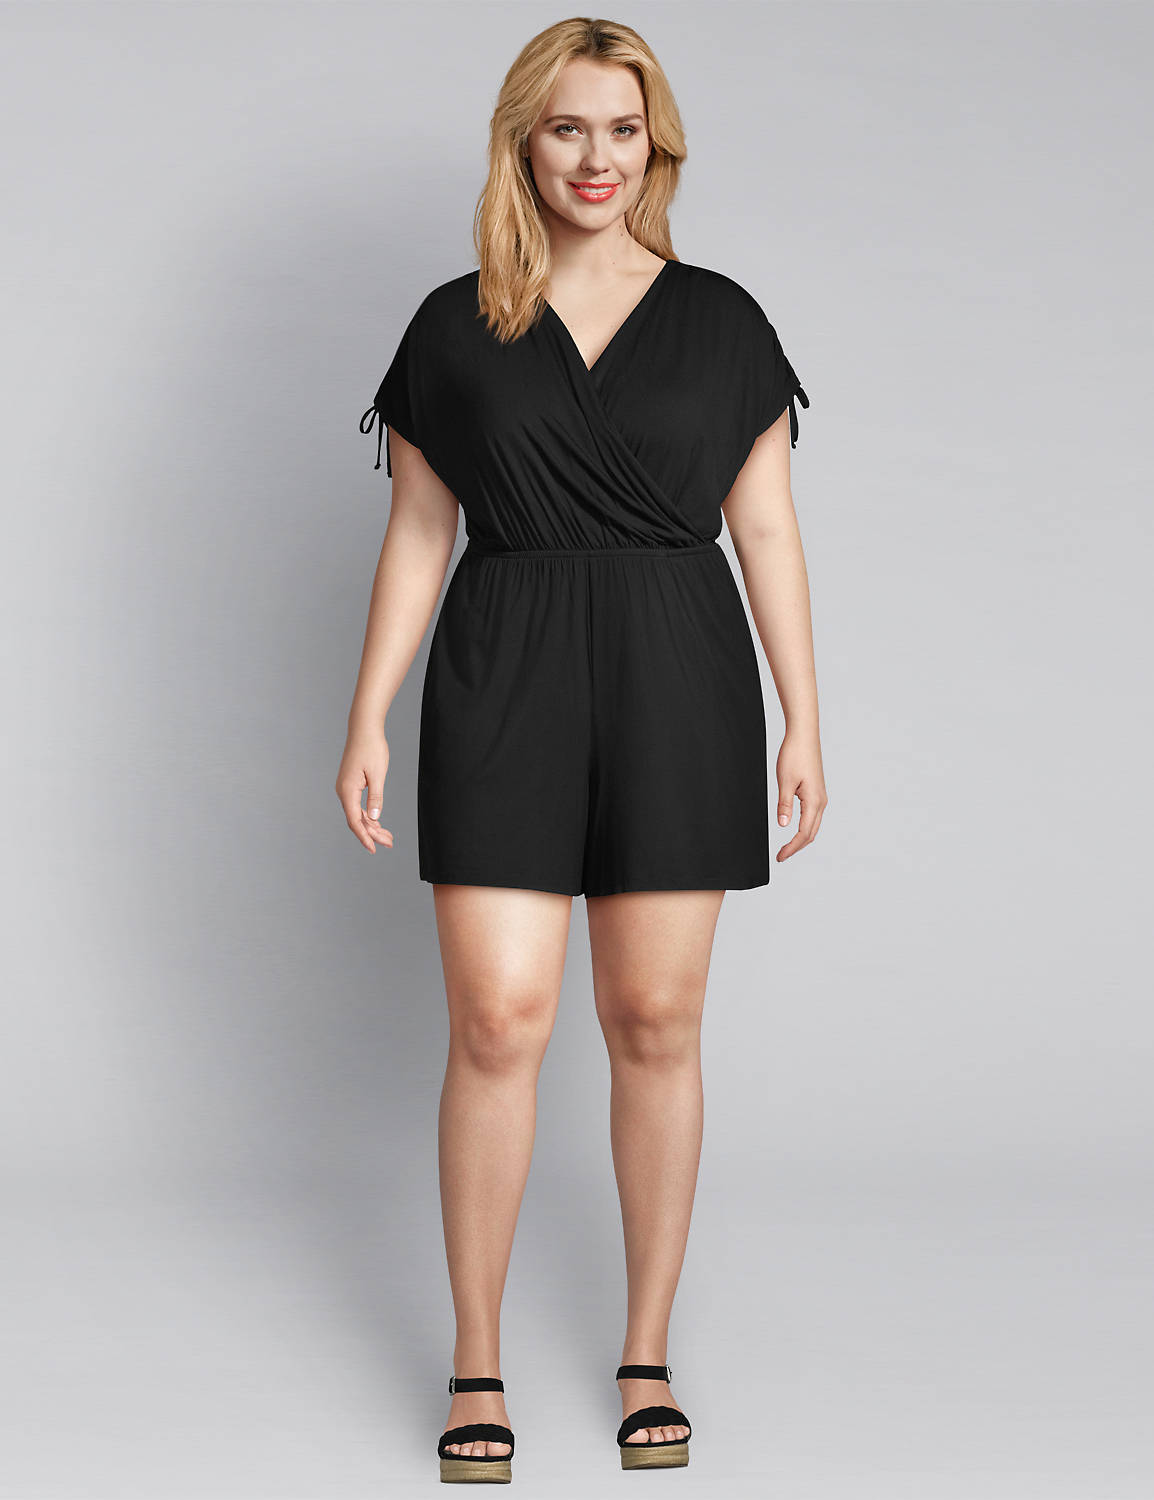 1113469 SH RUCHED SH ROMPER - 49.95:Pitch Black LB 1000322:14/16 Product Image 1